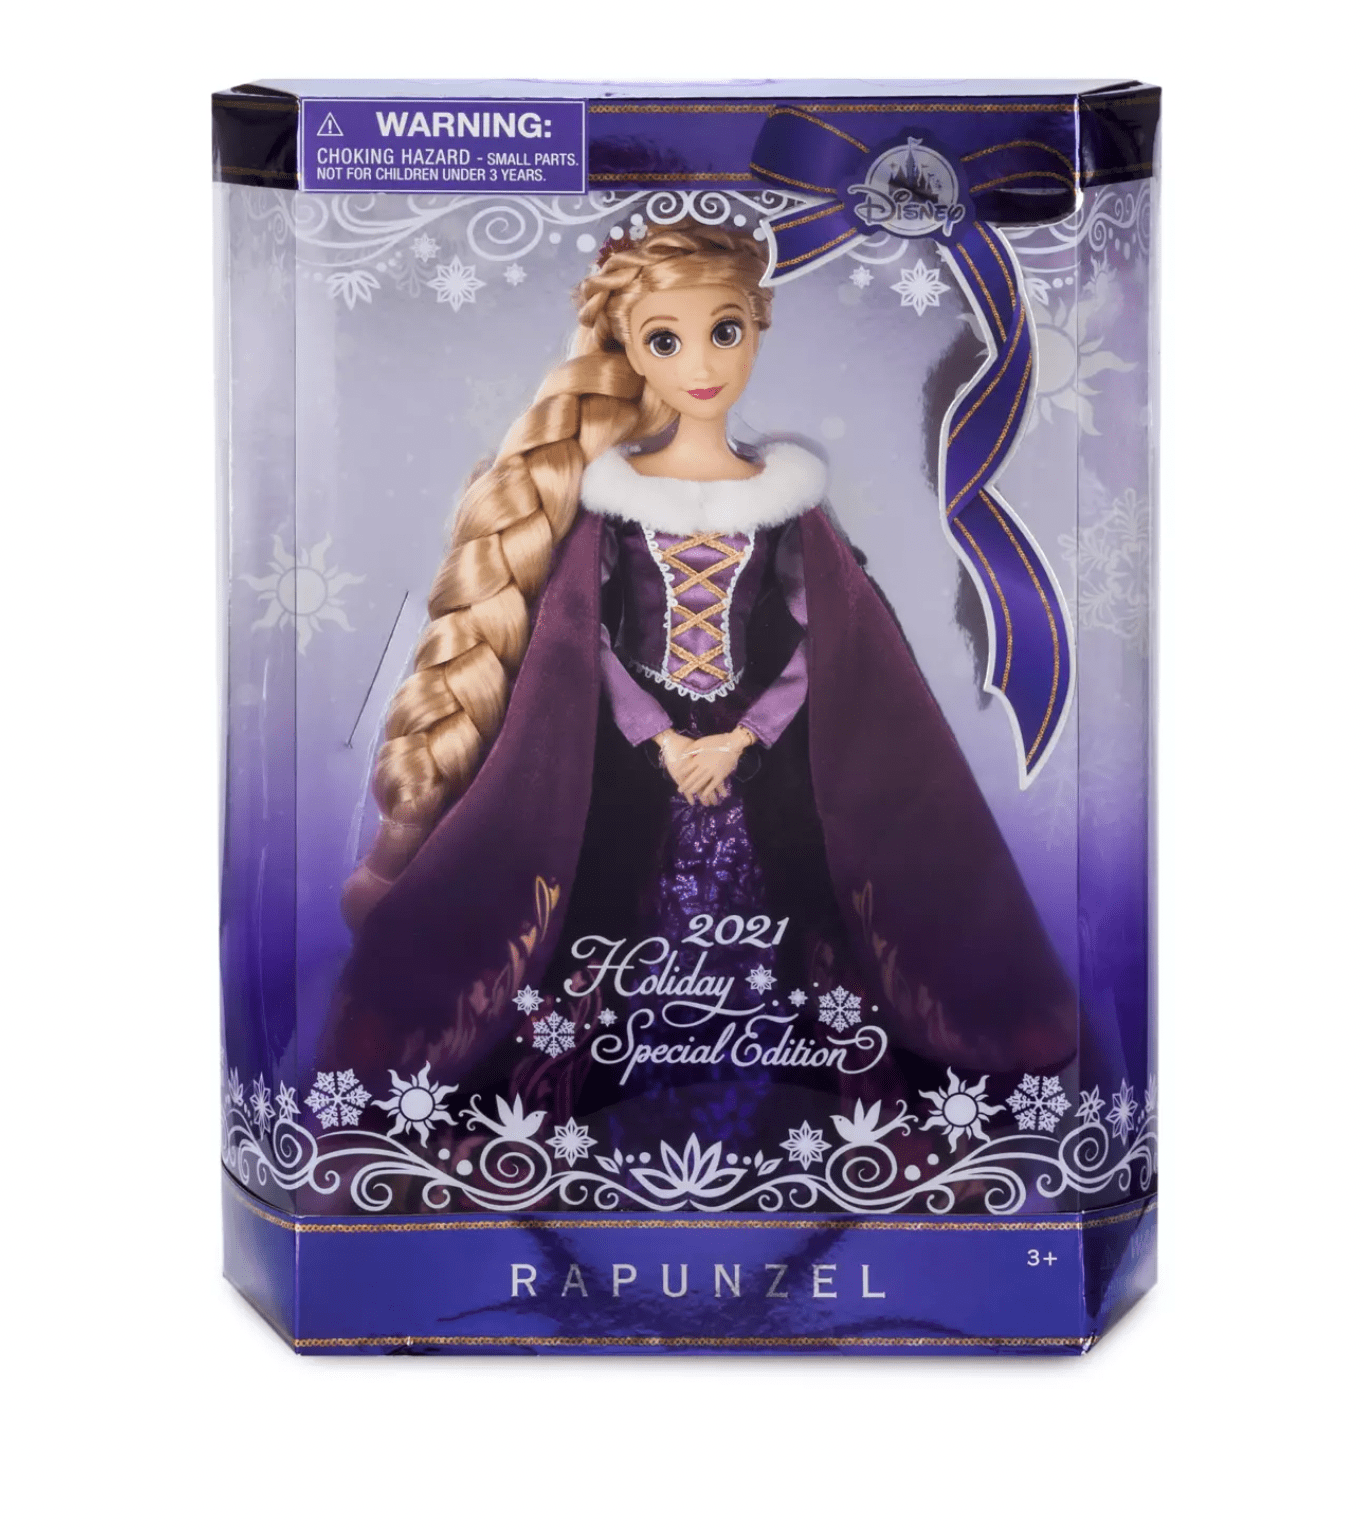 The Rapunzel Issue